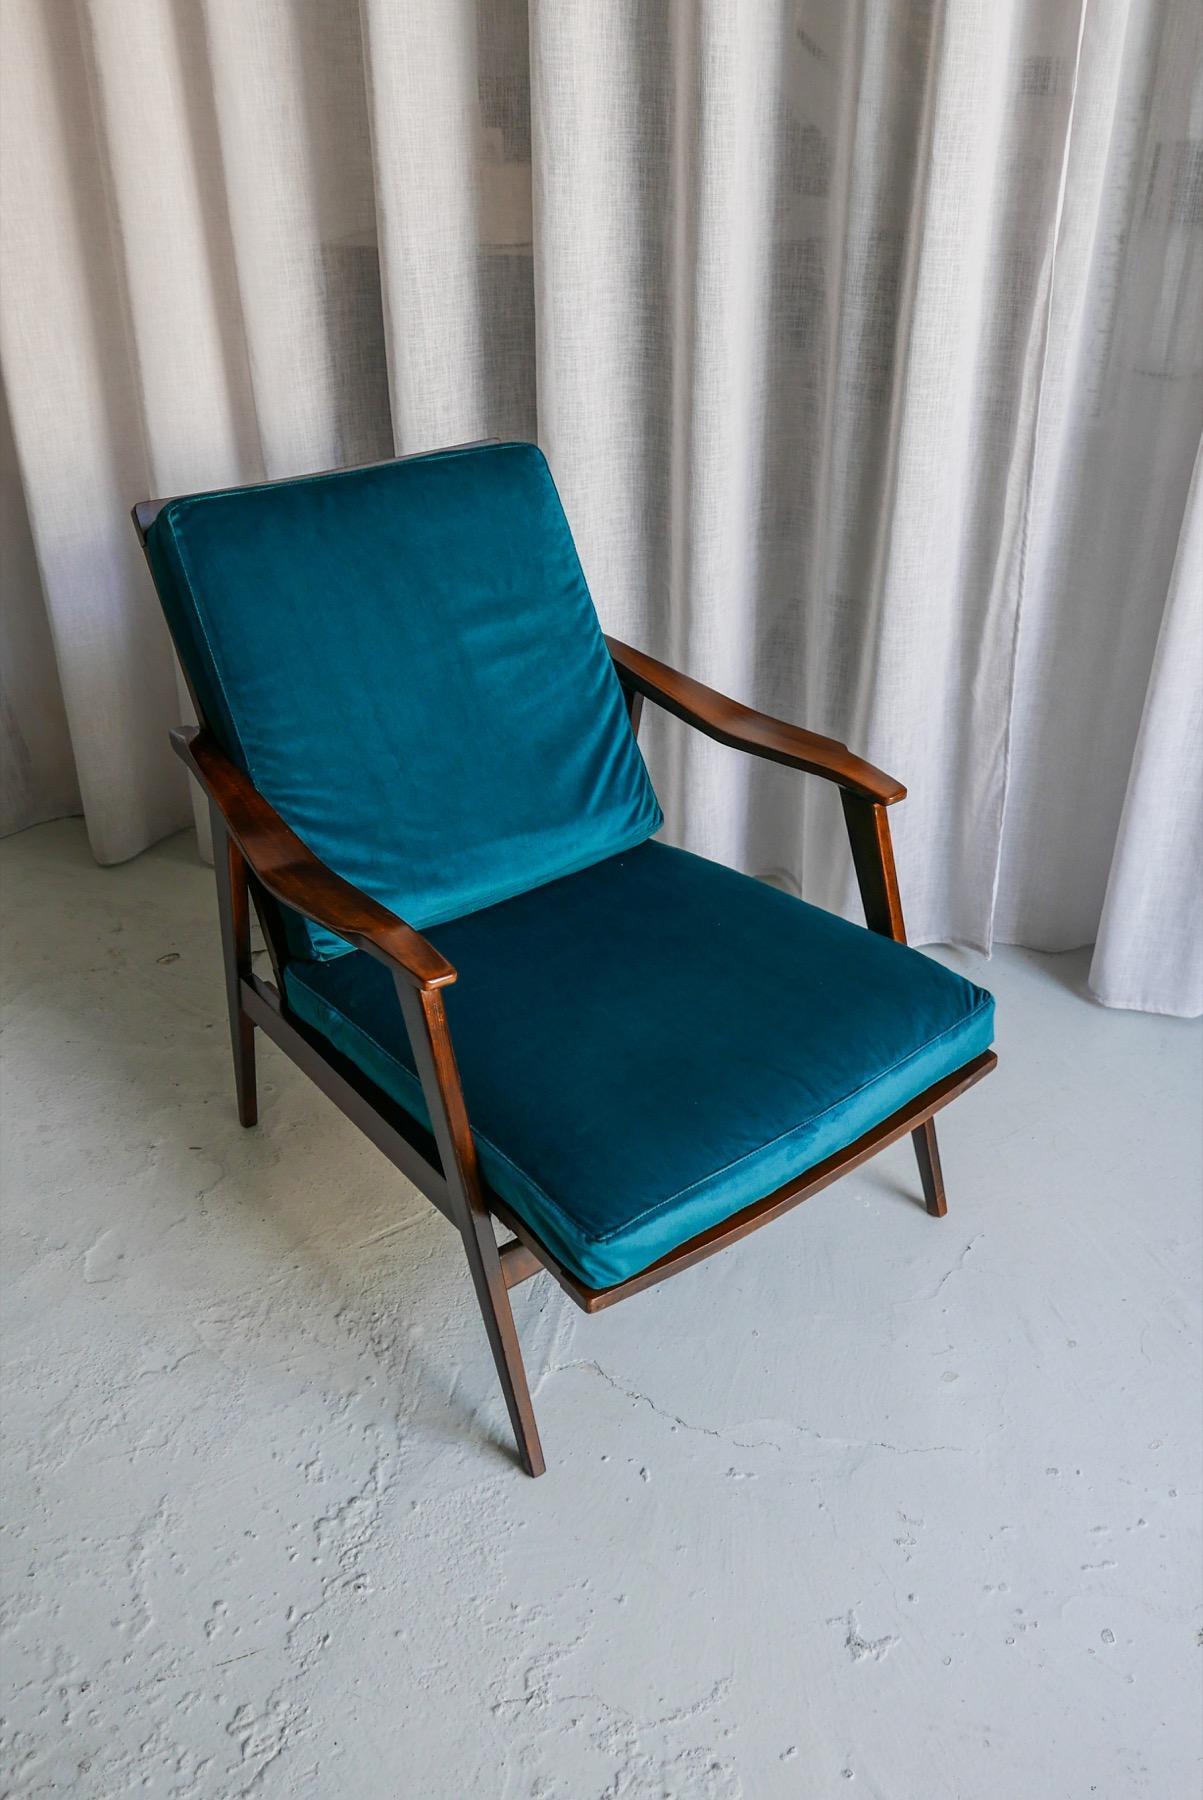 Offered for sale today is a beautiful and rare pair of reclining lounge chairs in teak, with freshly upholstered cushions in petrol green/blue velvet. Anonymous, yet extremely refined in the design and details, they date back to the 1960s and are of